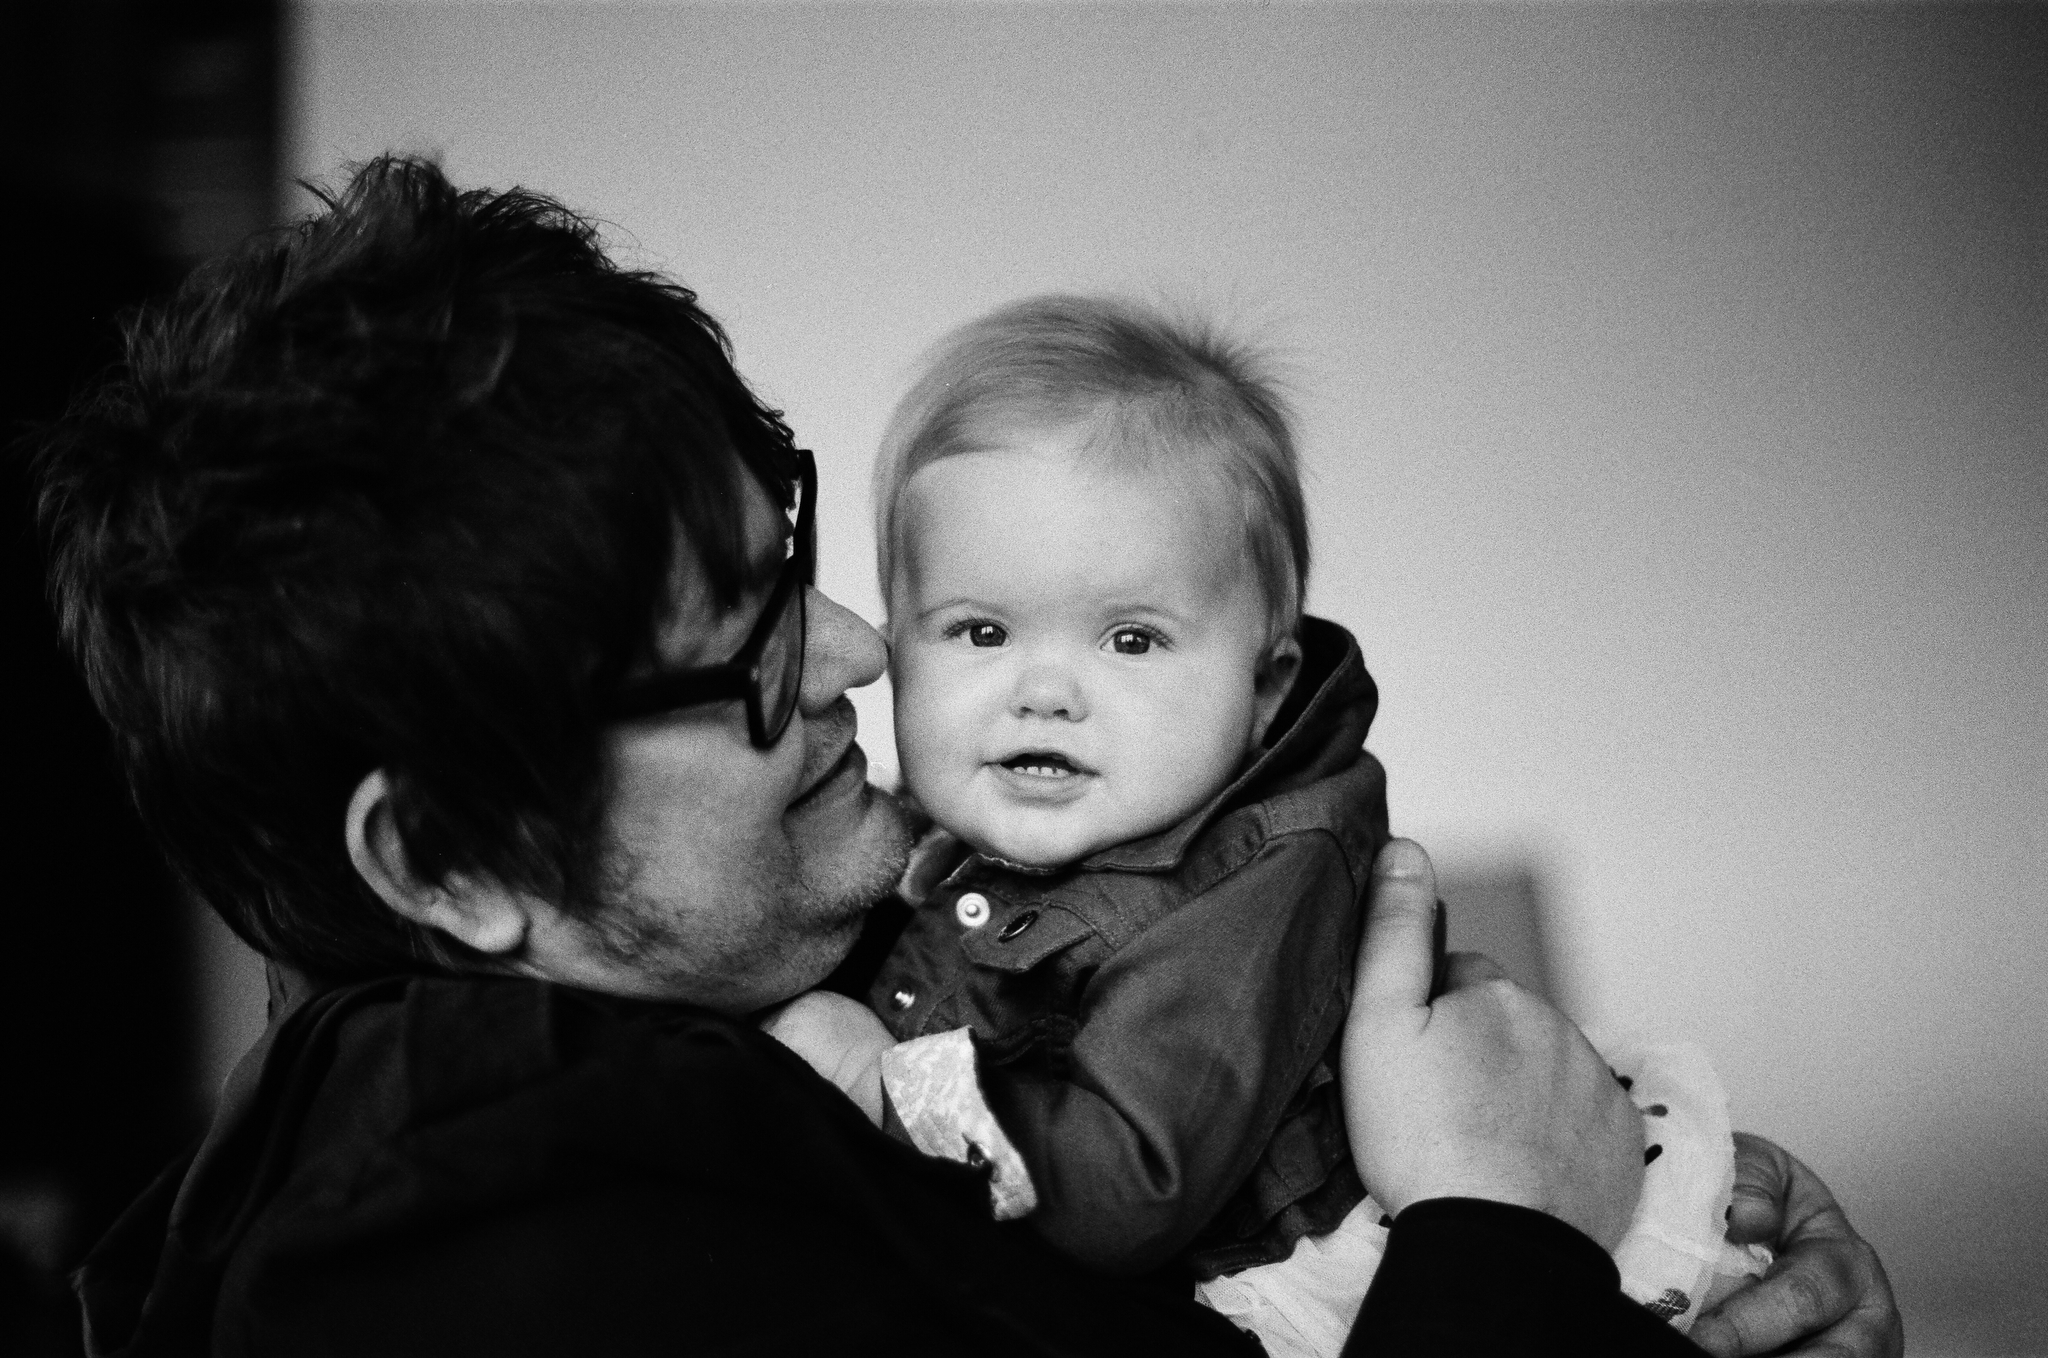 Photos of a father and a baby